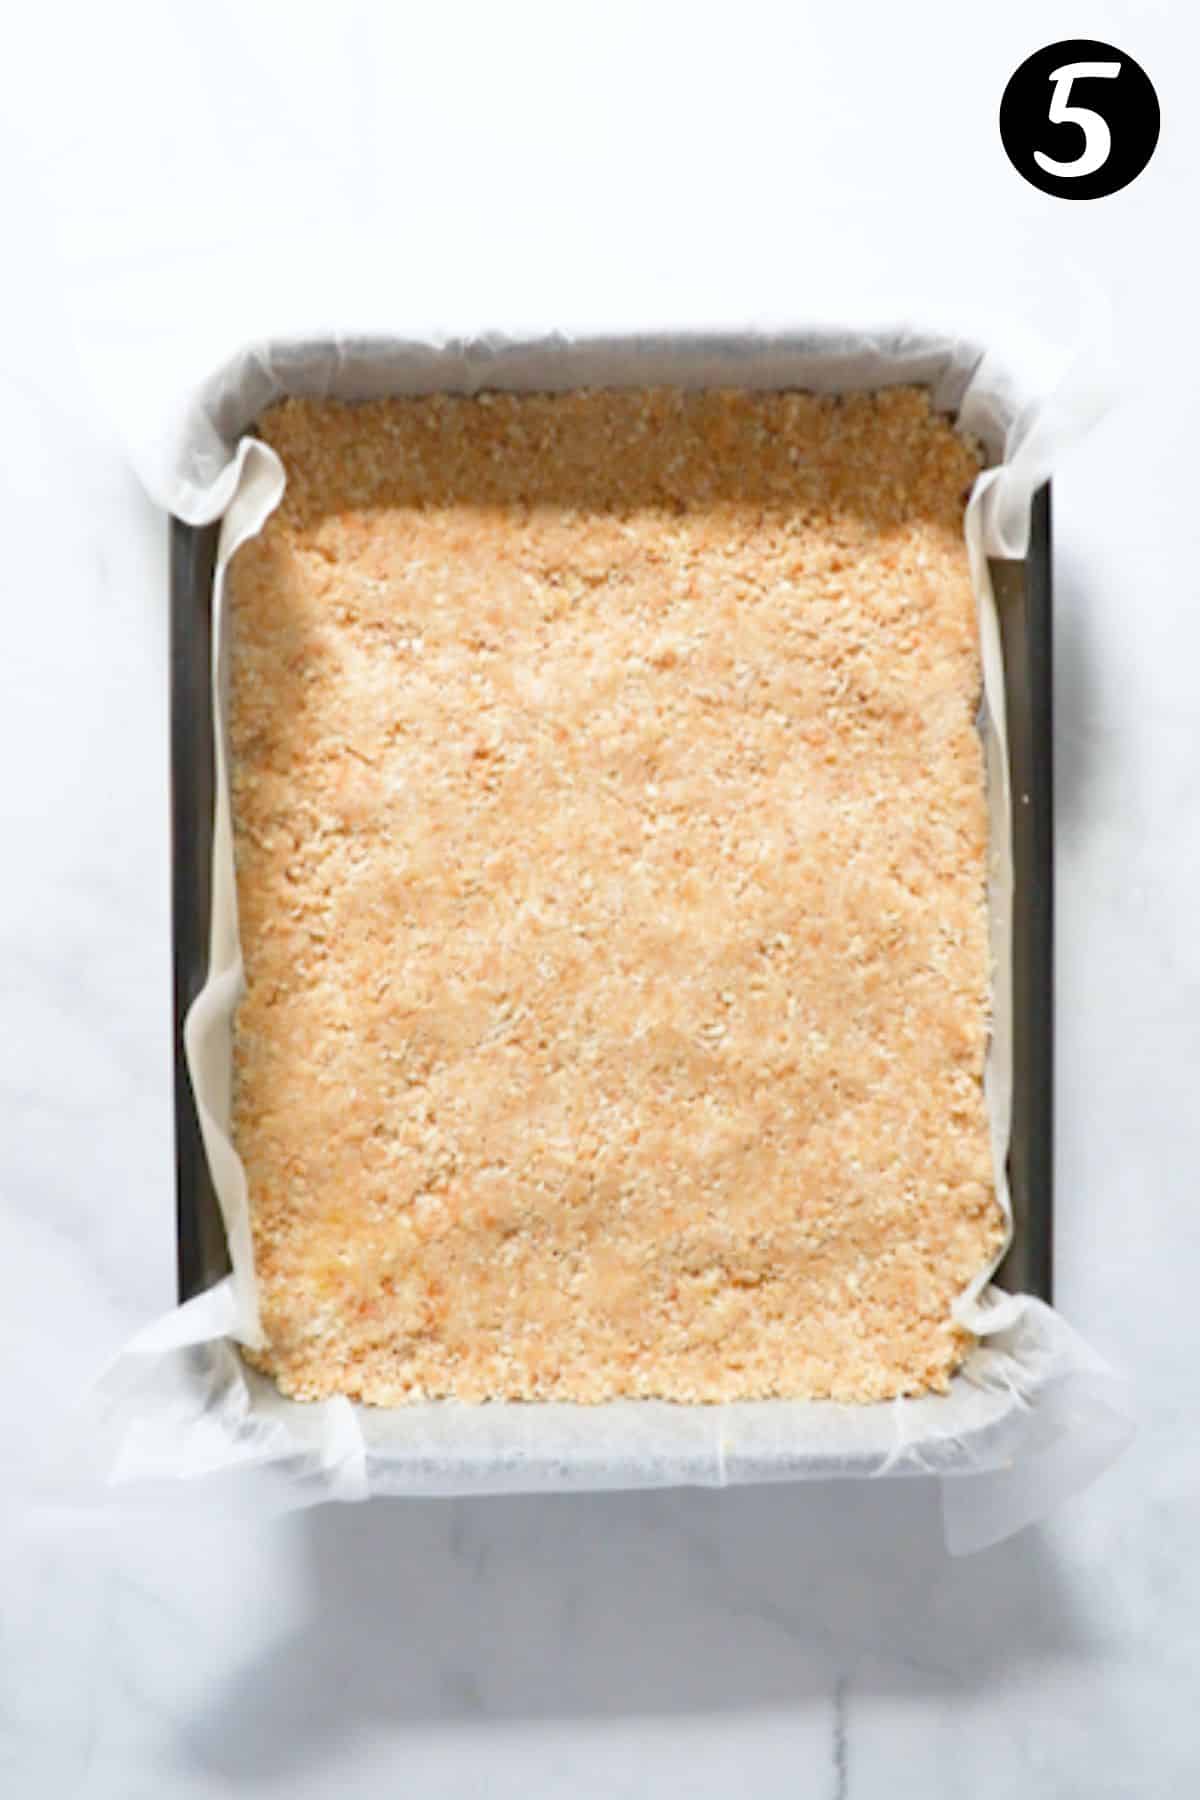 a biscuit base pressed firmly into a baking tin lined with paper.